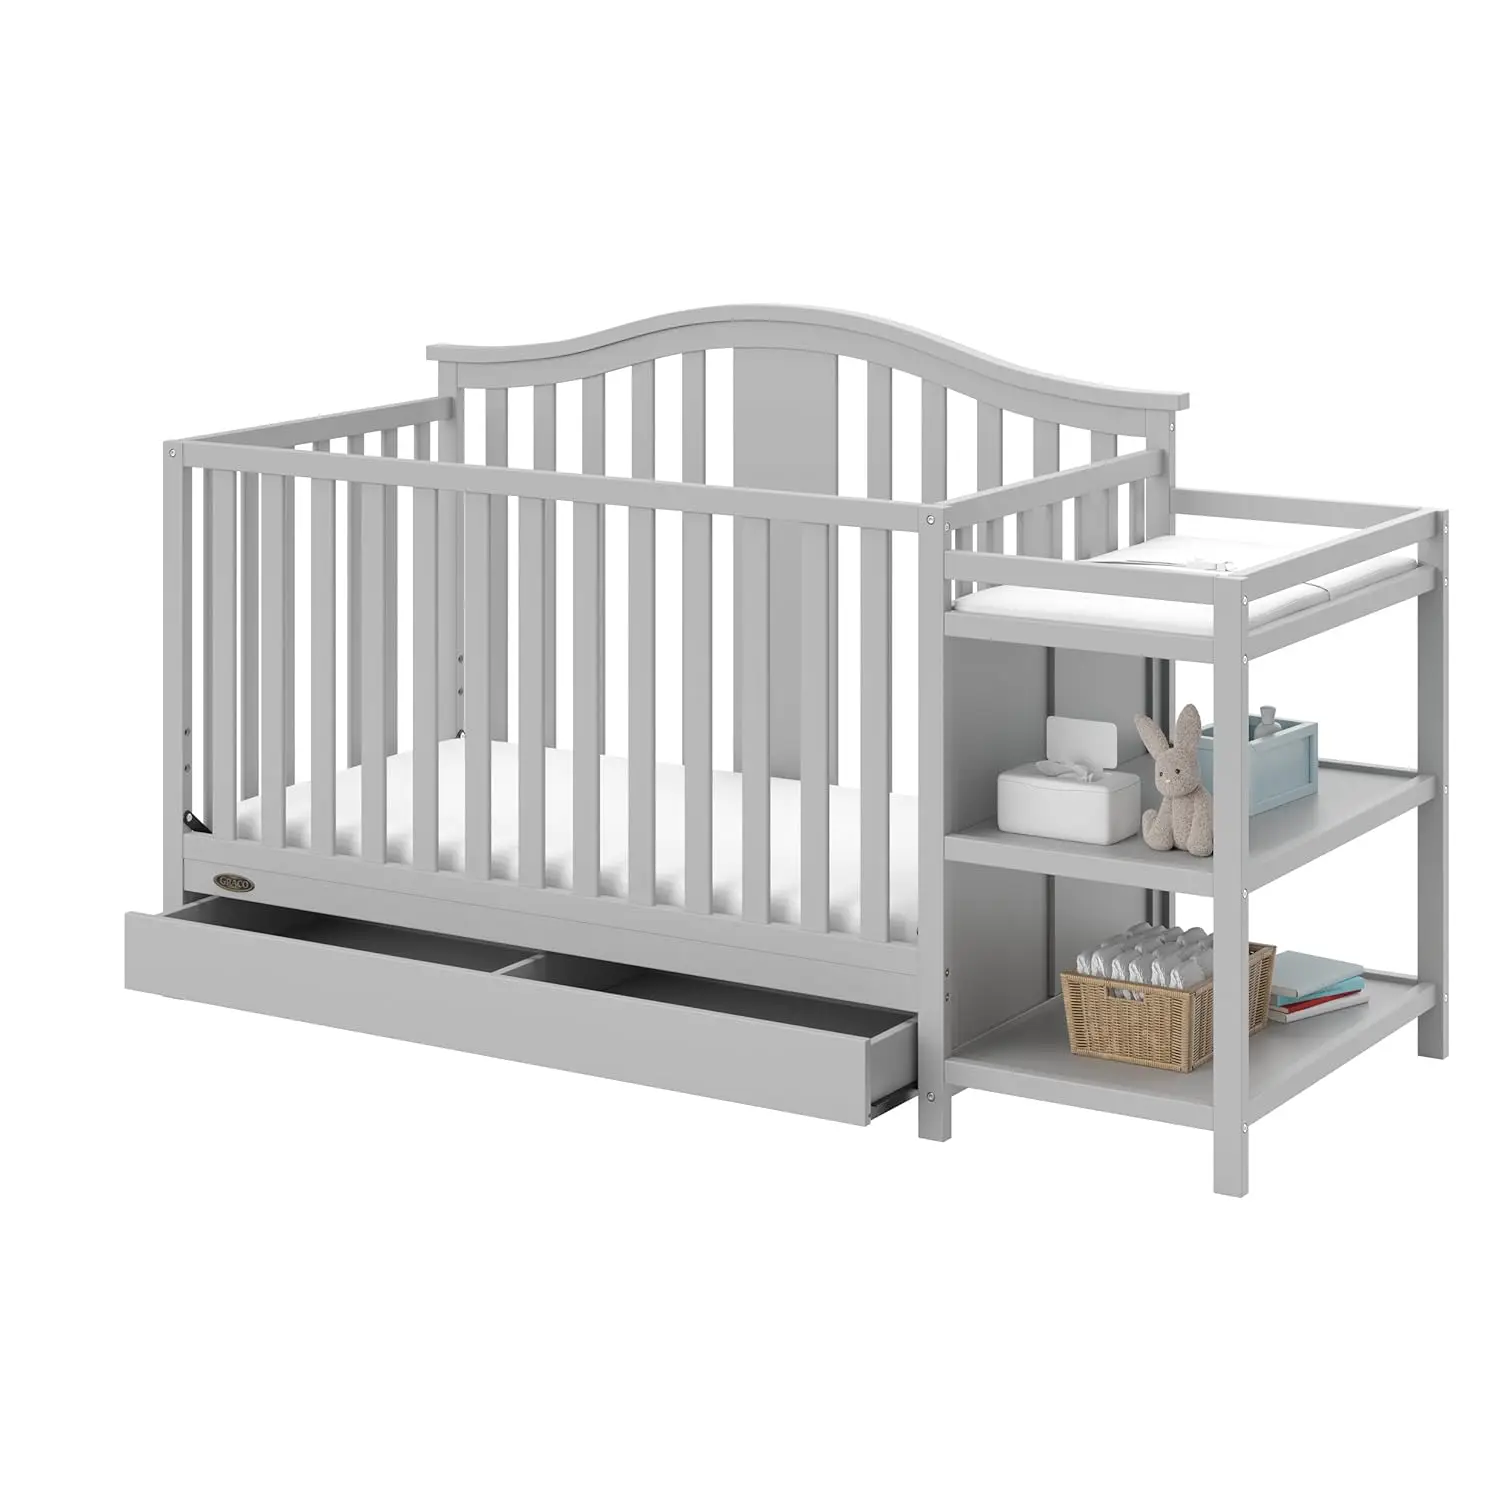 

Graco Solano 4-in-1 Convertible Crib and Changer with Drawer (Pebble Gray) – Crib and Changing Table Combo with Drawer